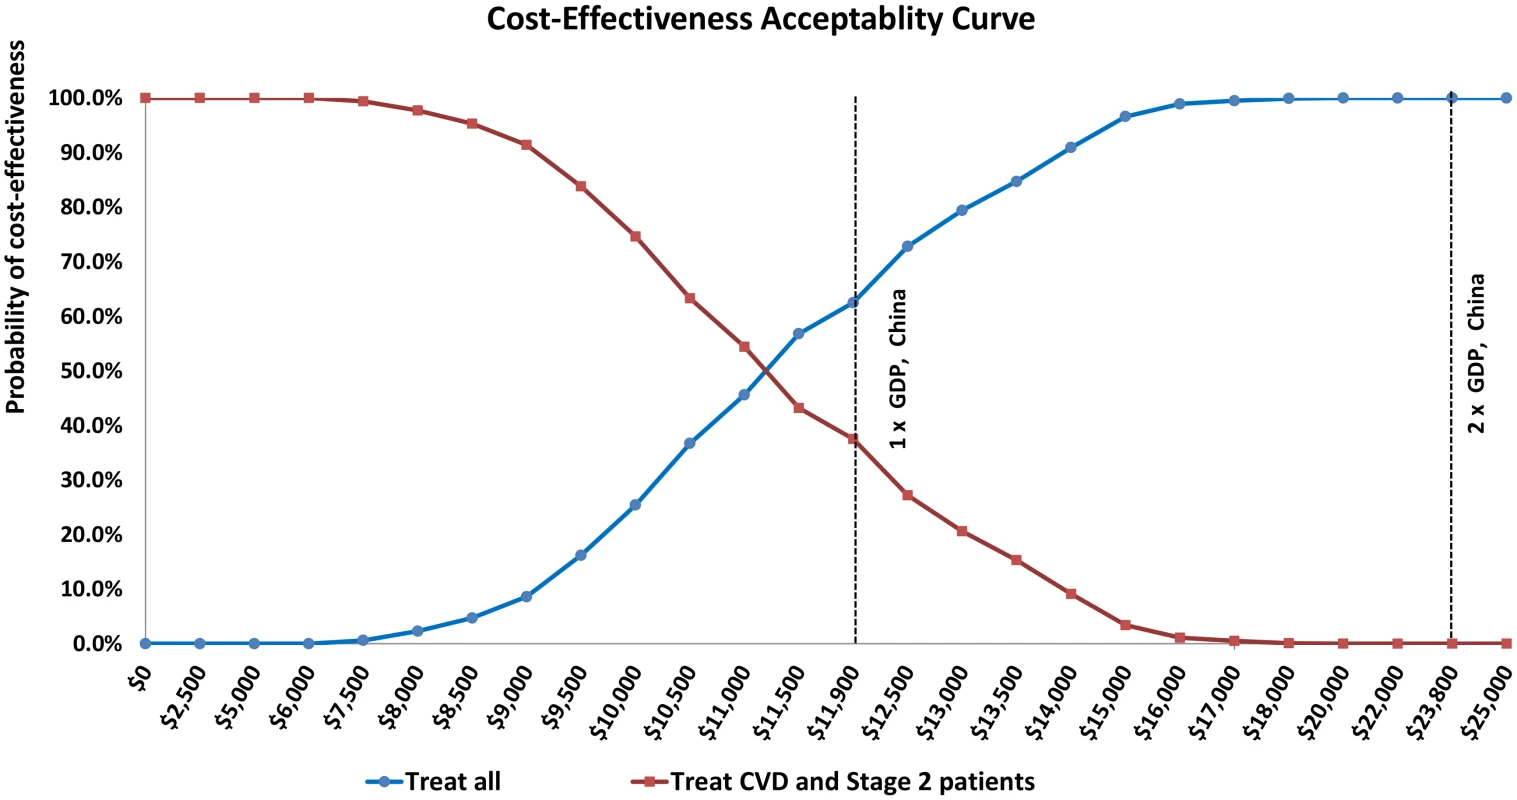 Cost-effectiveness acceptability curves comparing treating all untreated hypertensive adults (blue) with treating only untreated CVD patients and adults with stage 2 hypertension but without CVD (red).